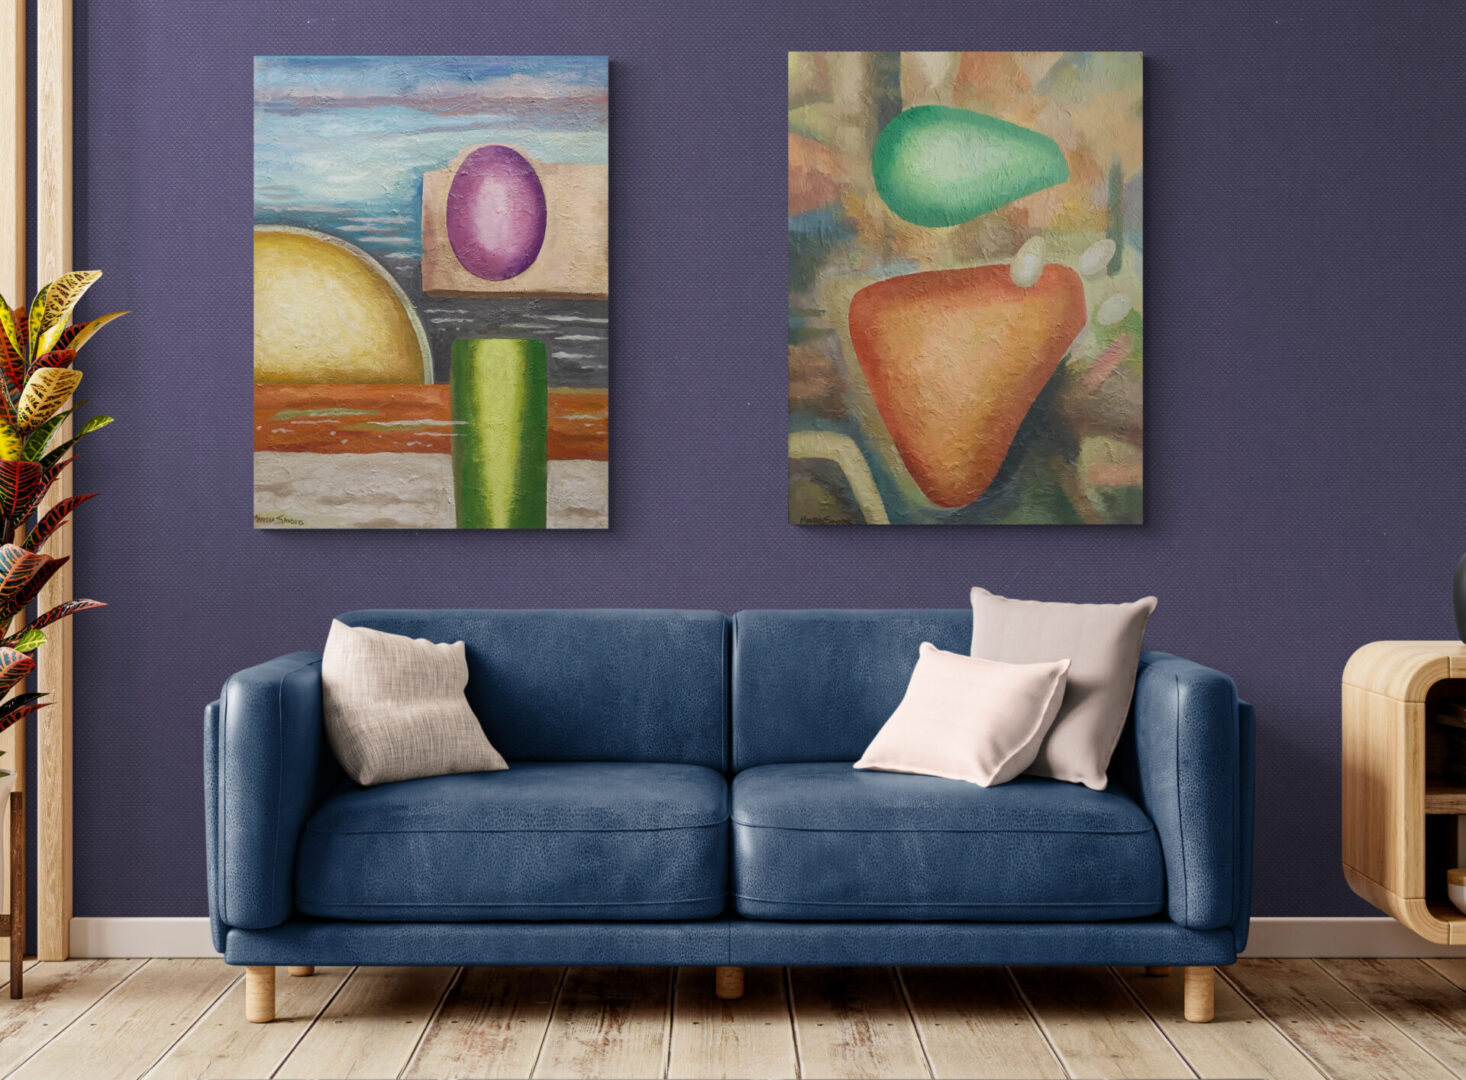 Living room with local fine art for sale on two paintings.